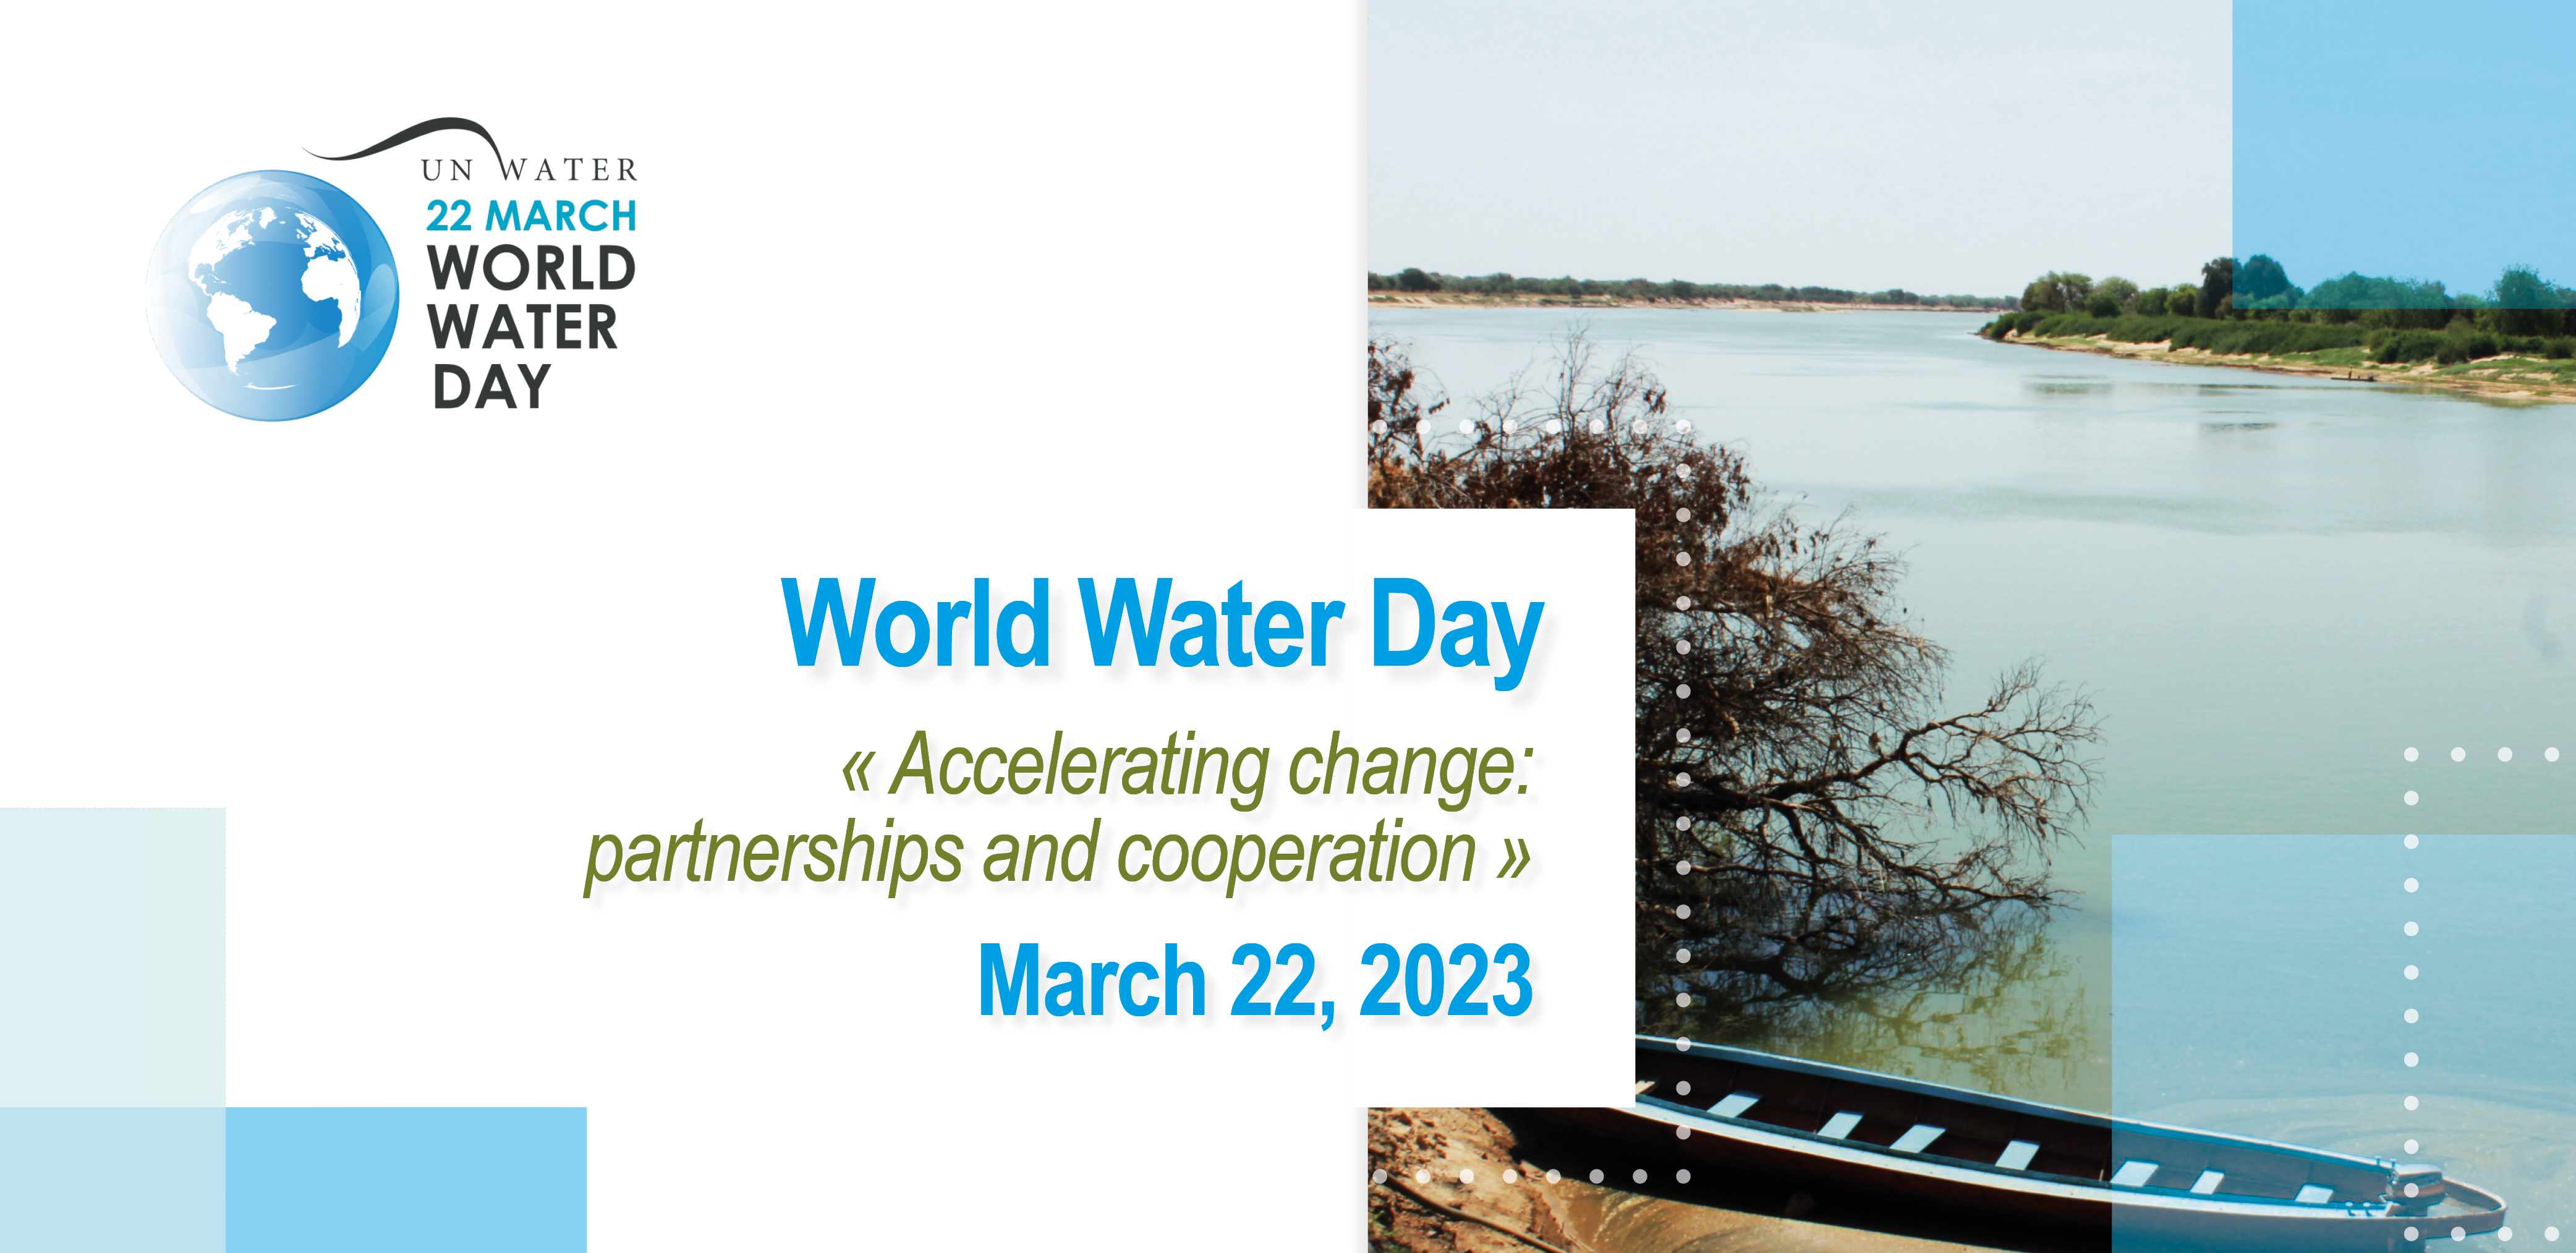 World Water Day | Accelerating Change, March 22, 2023